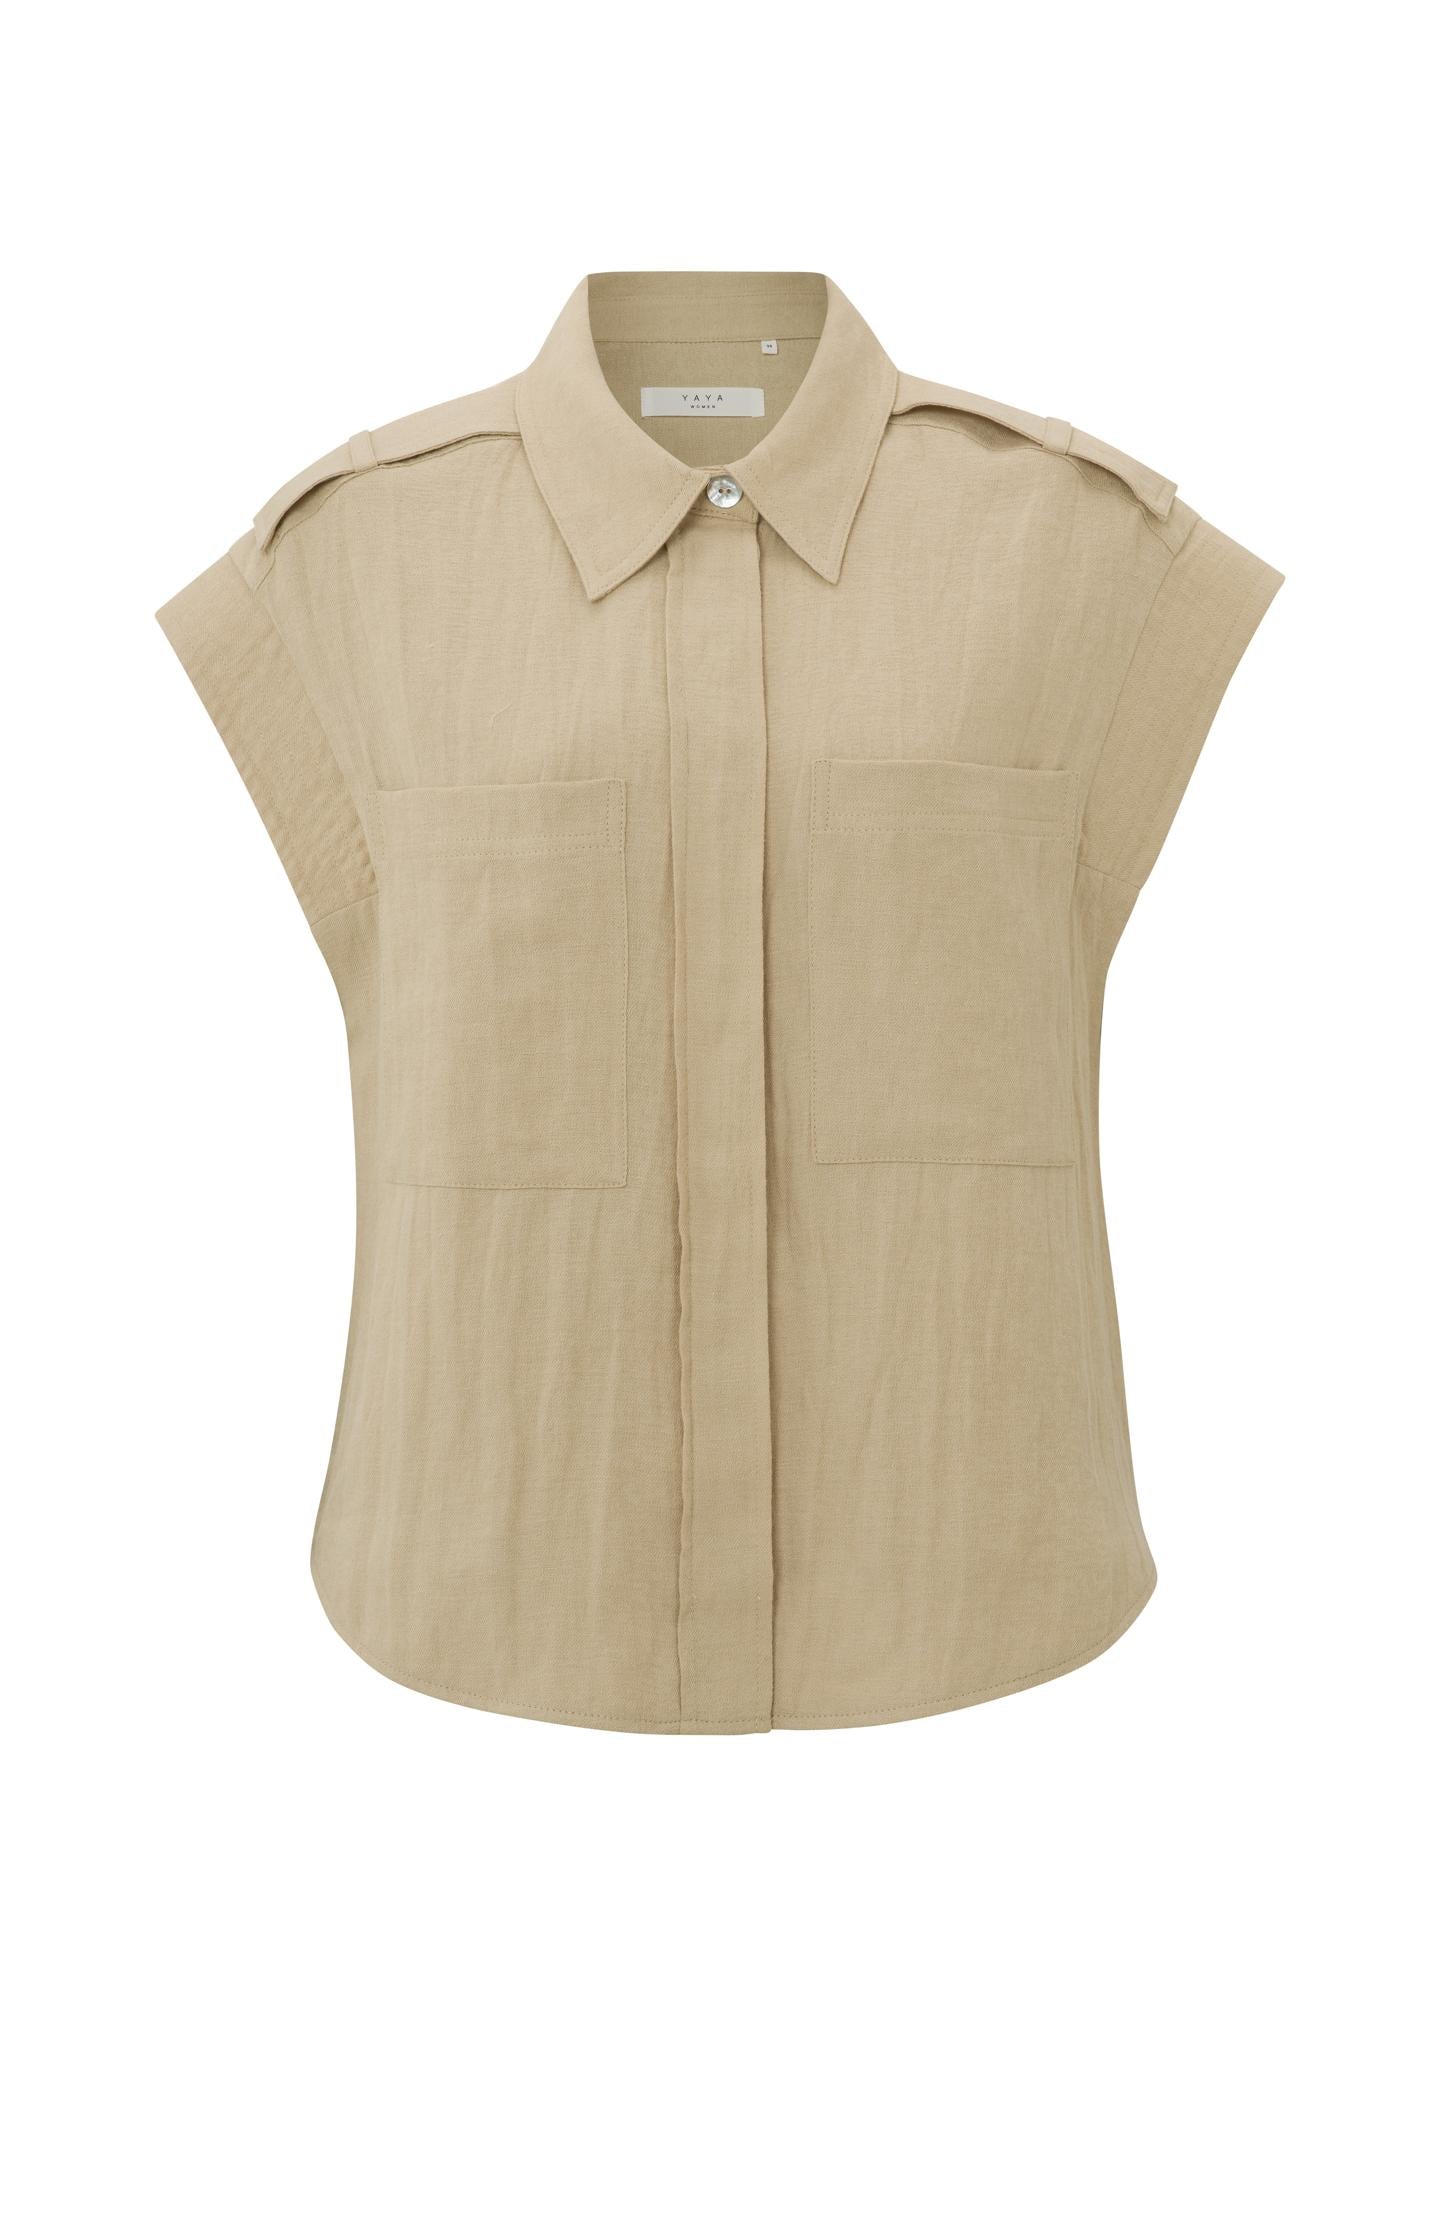 Sleeveless shirt jacket with buttons and chest pockets - Type: product